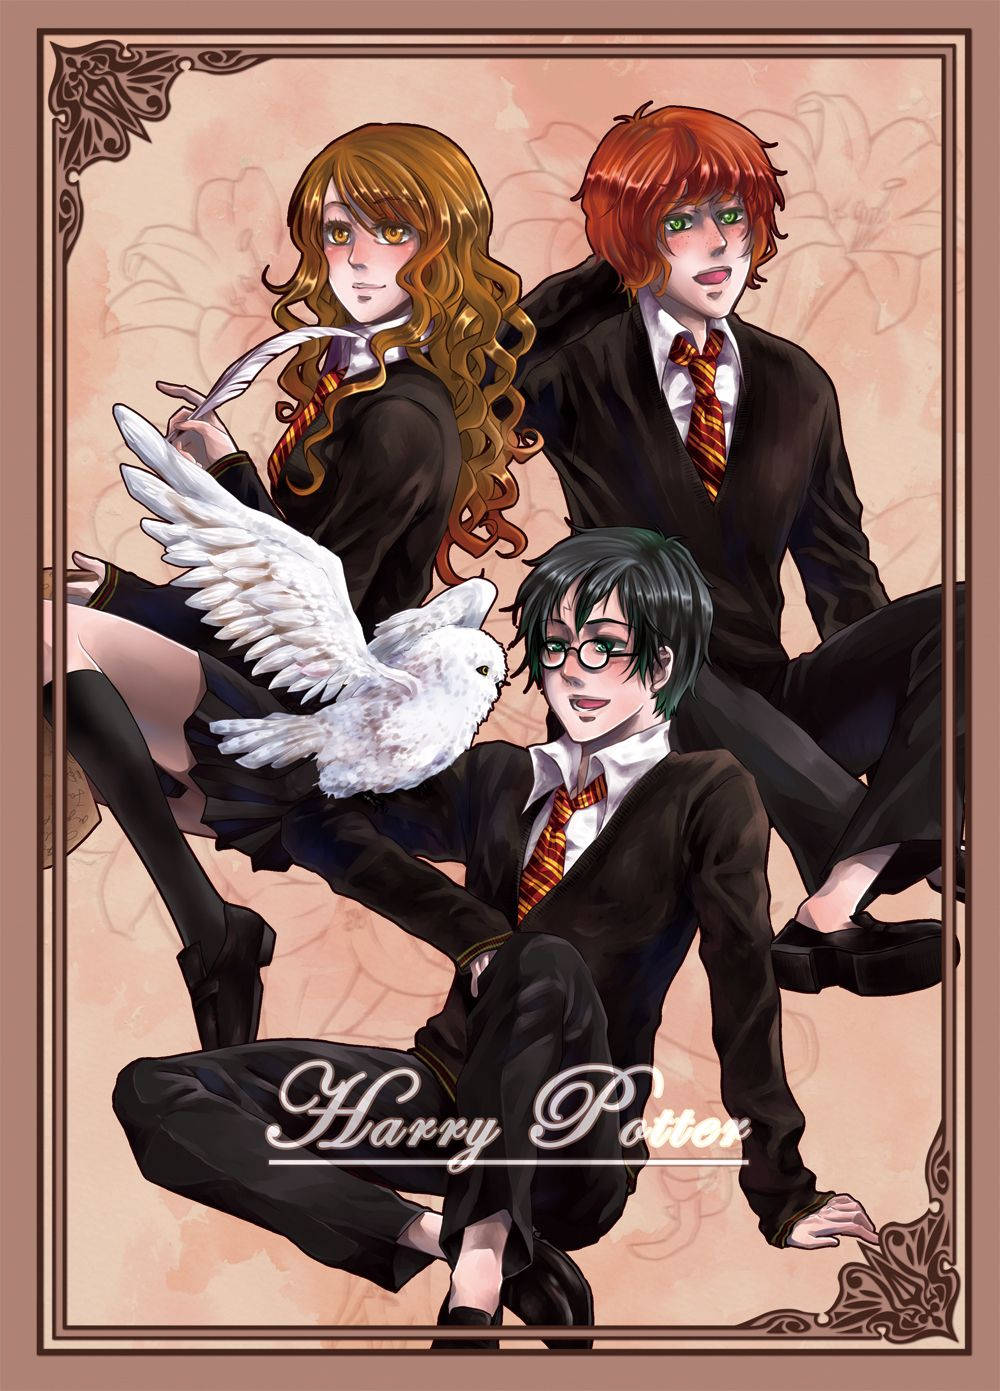 Magic School Love Harry Potter Fanart Collection  ART street Social  Networking Site for Posting Illustrations and Manga